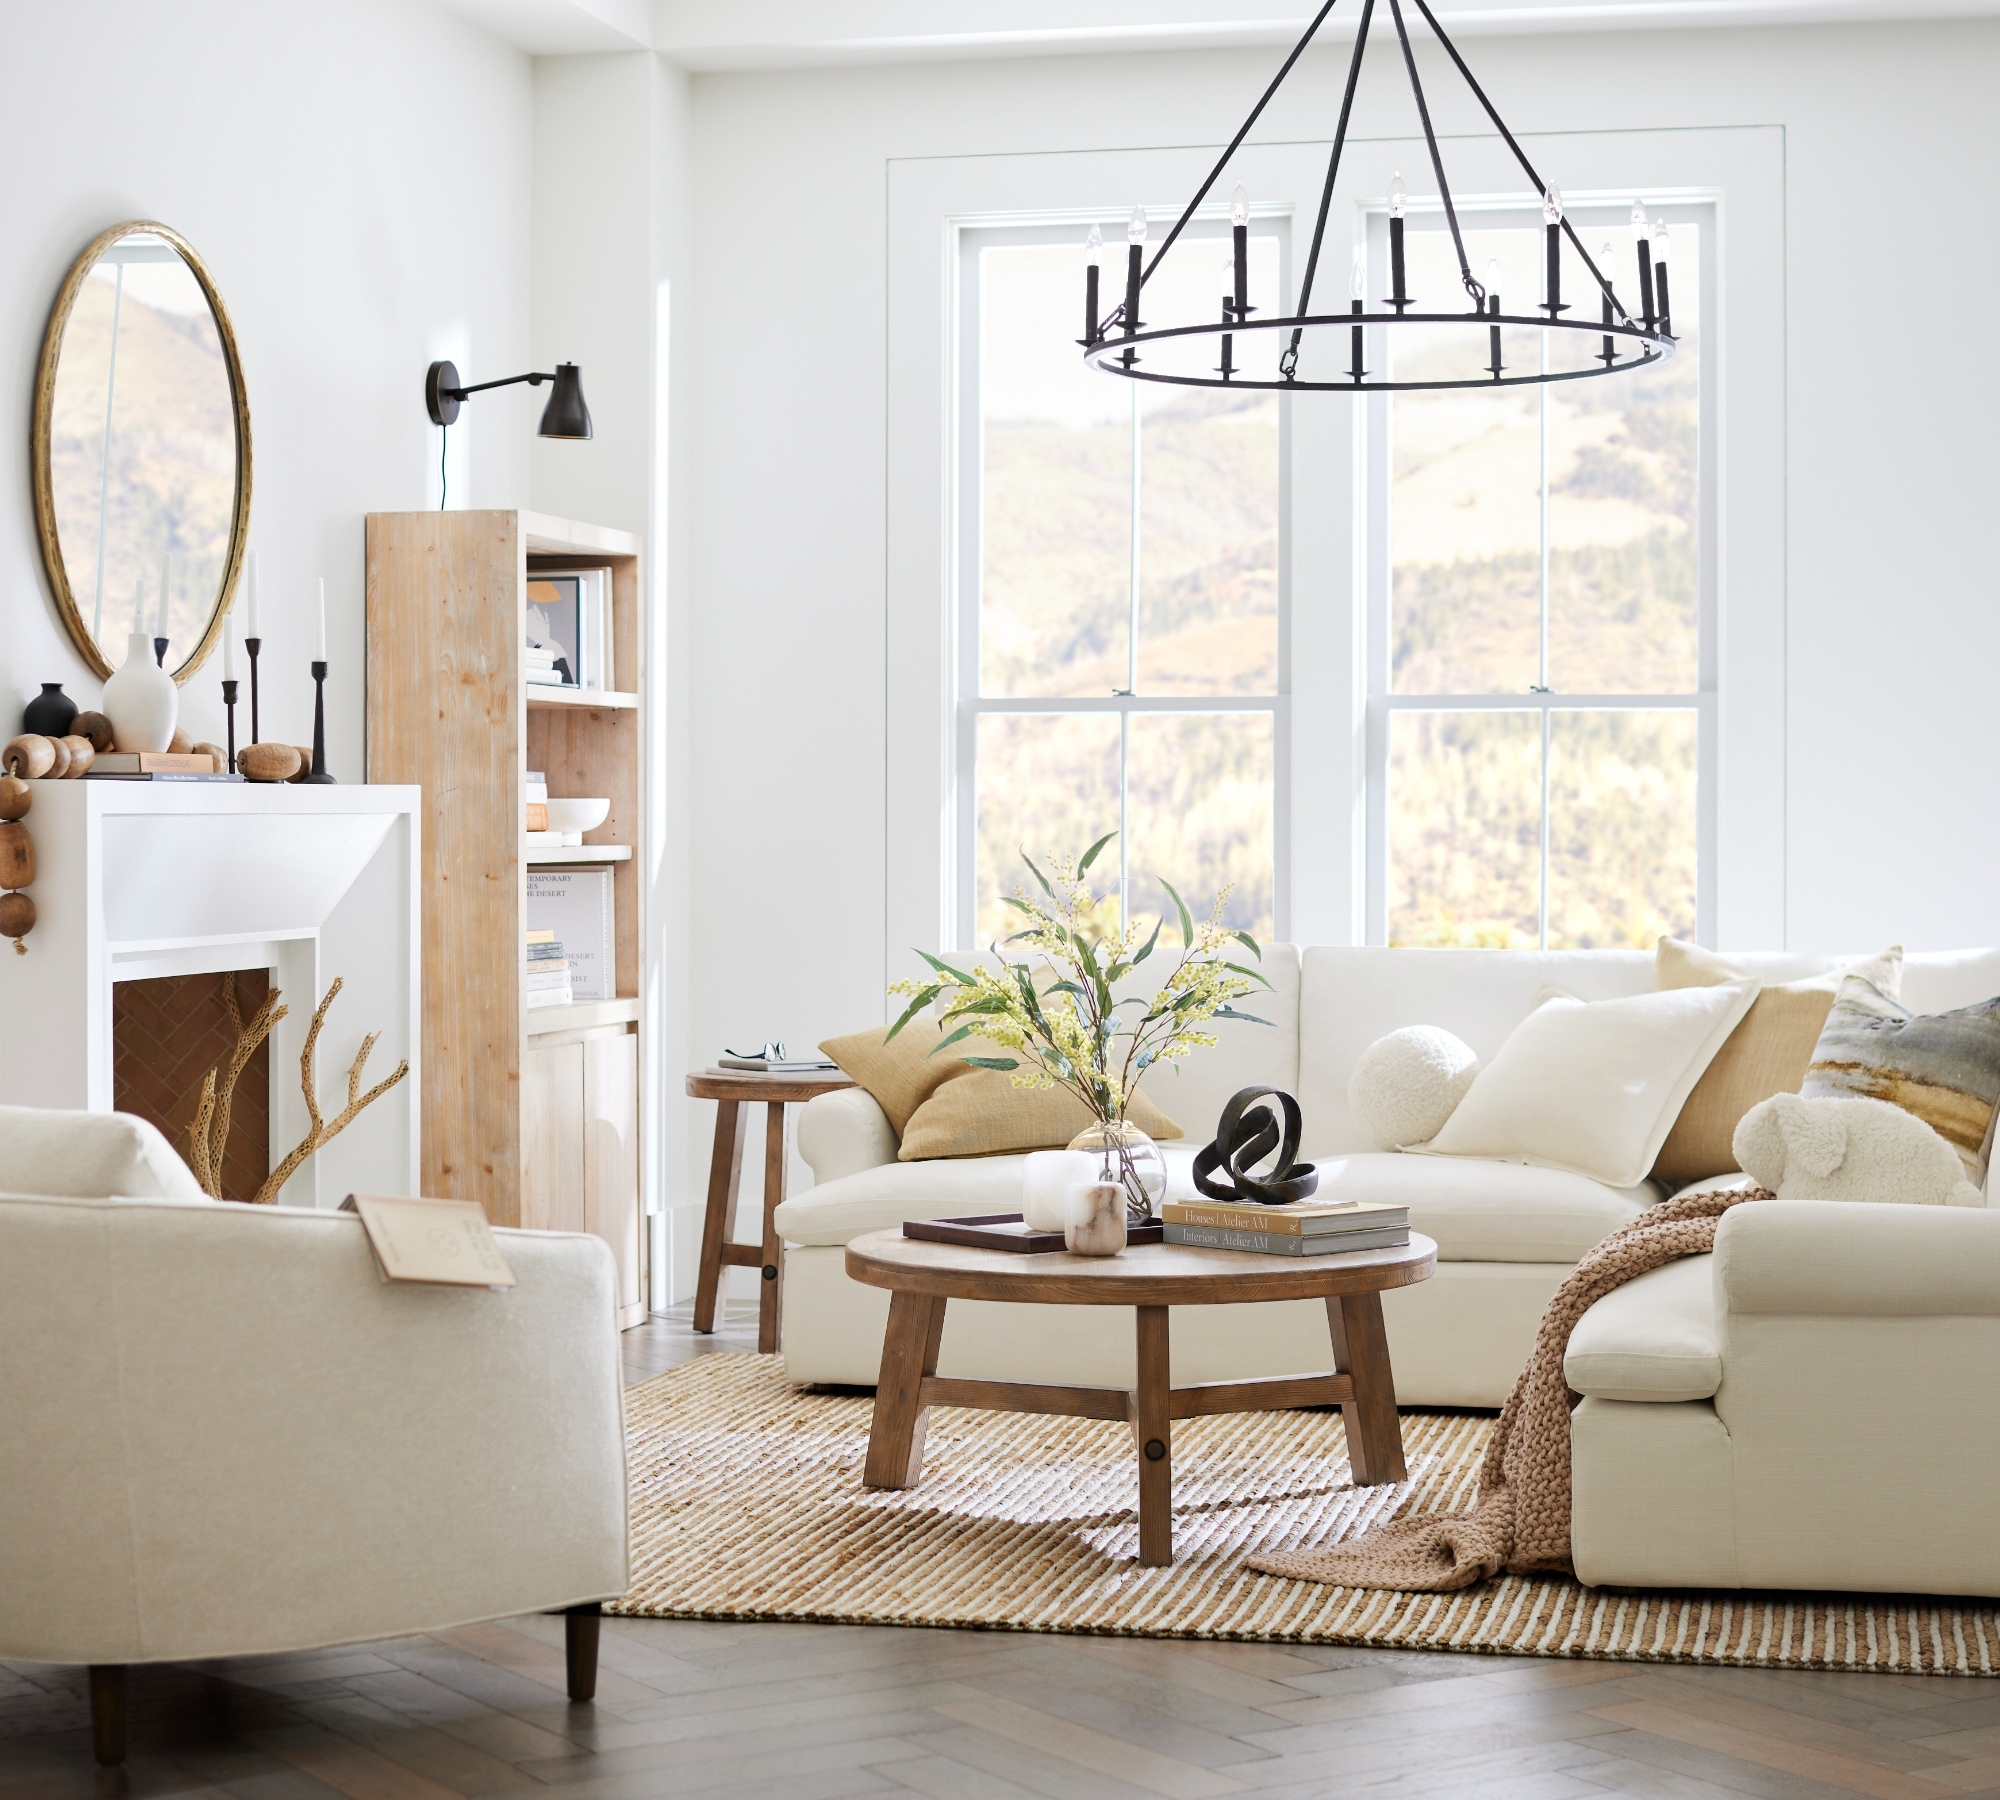 Pottery Barn Living Rooms by Pottery Barn